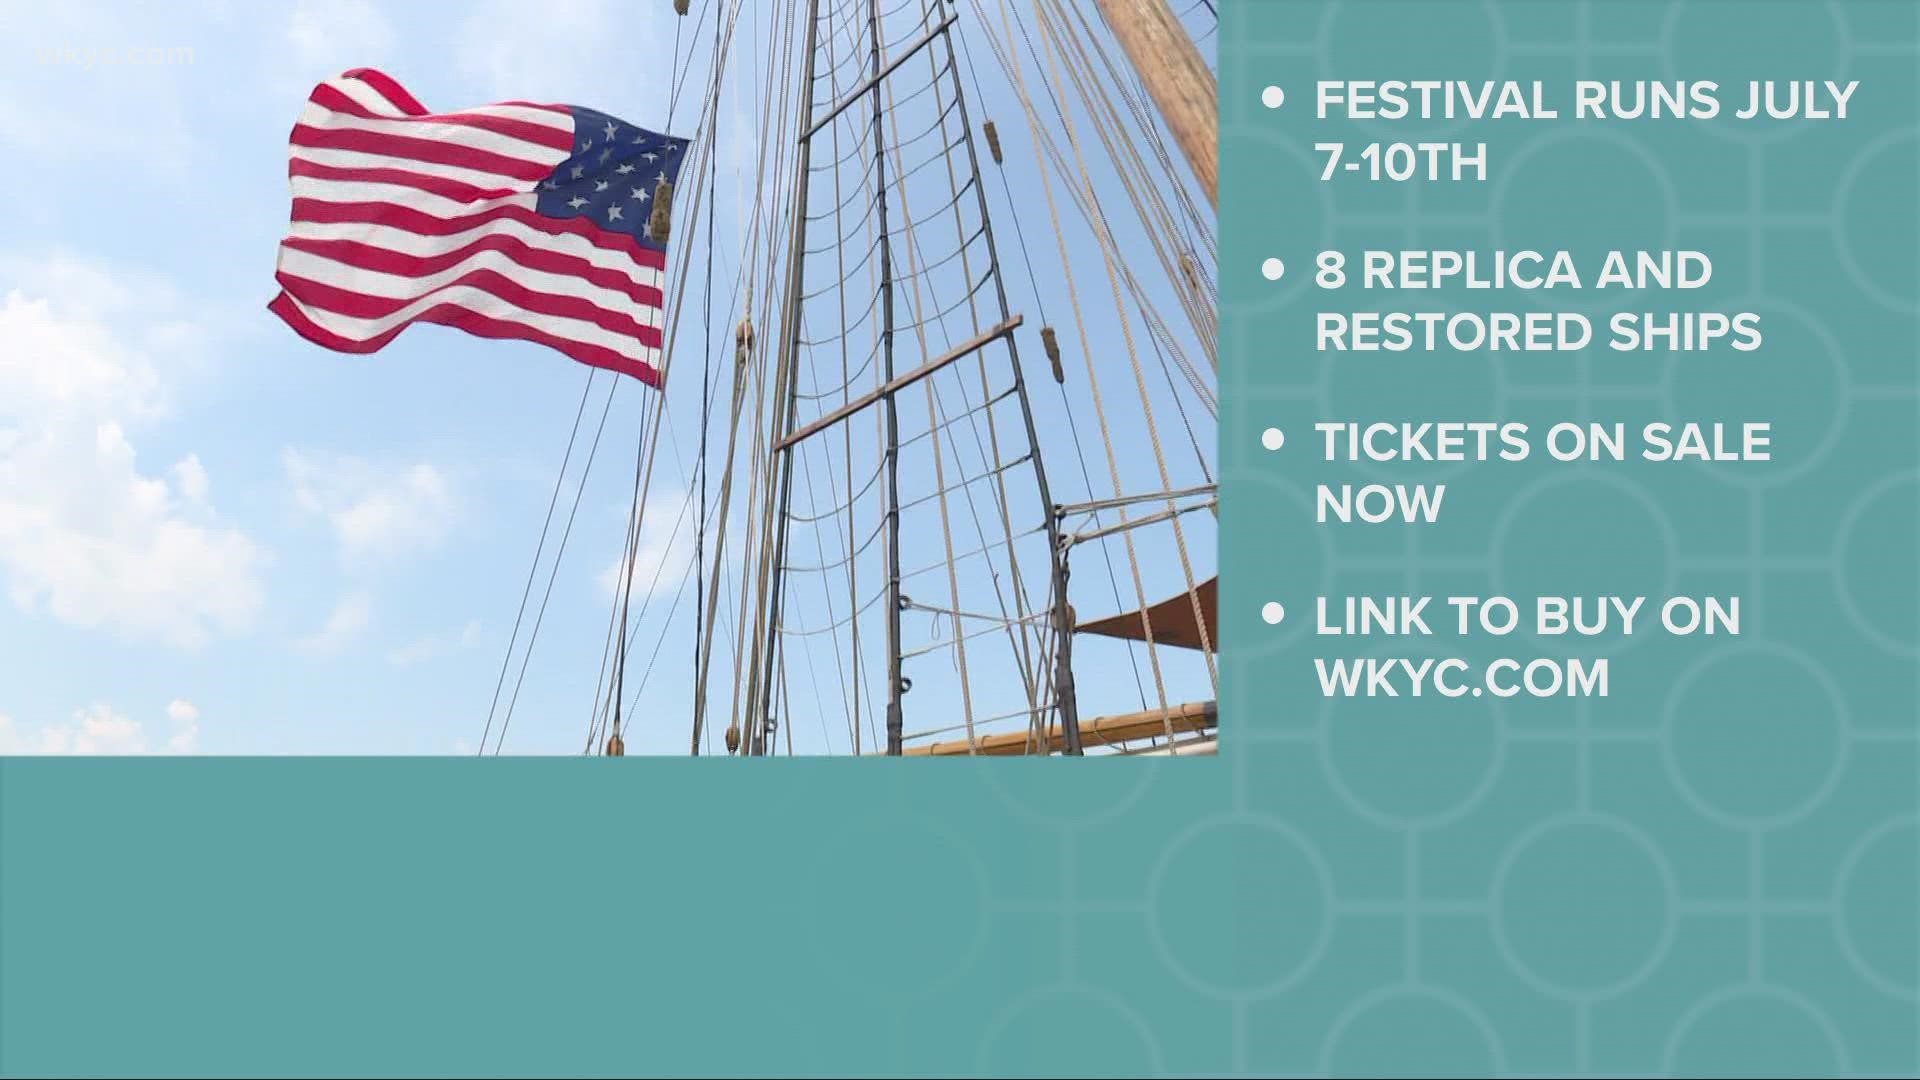 It’s back! The Cleveland Tall Ships Festival is making a return to the city’s waterfront this summer from July 7-10.